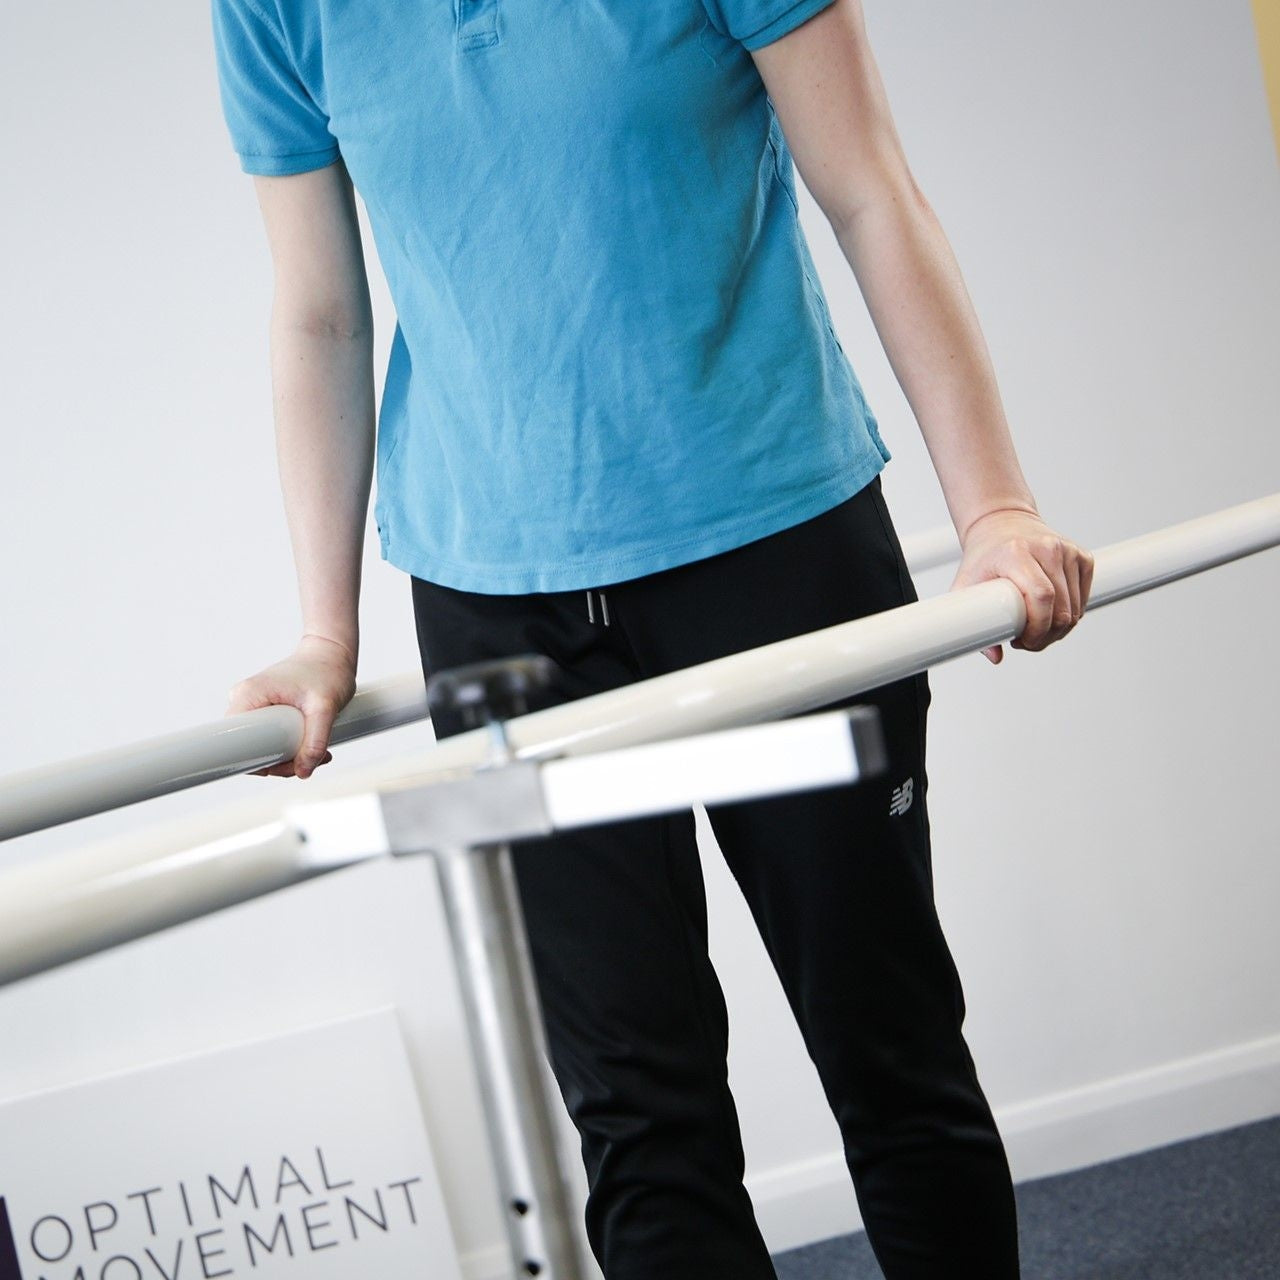 Pro Parallel Bars - Height 690mm to 1000mm - Length 3m